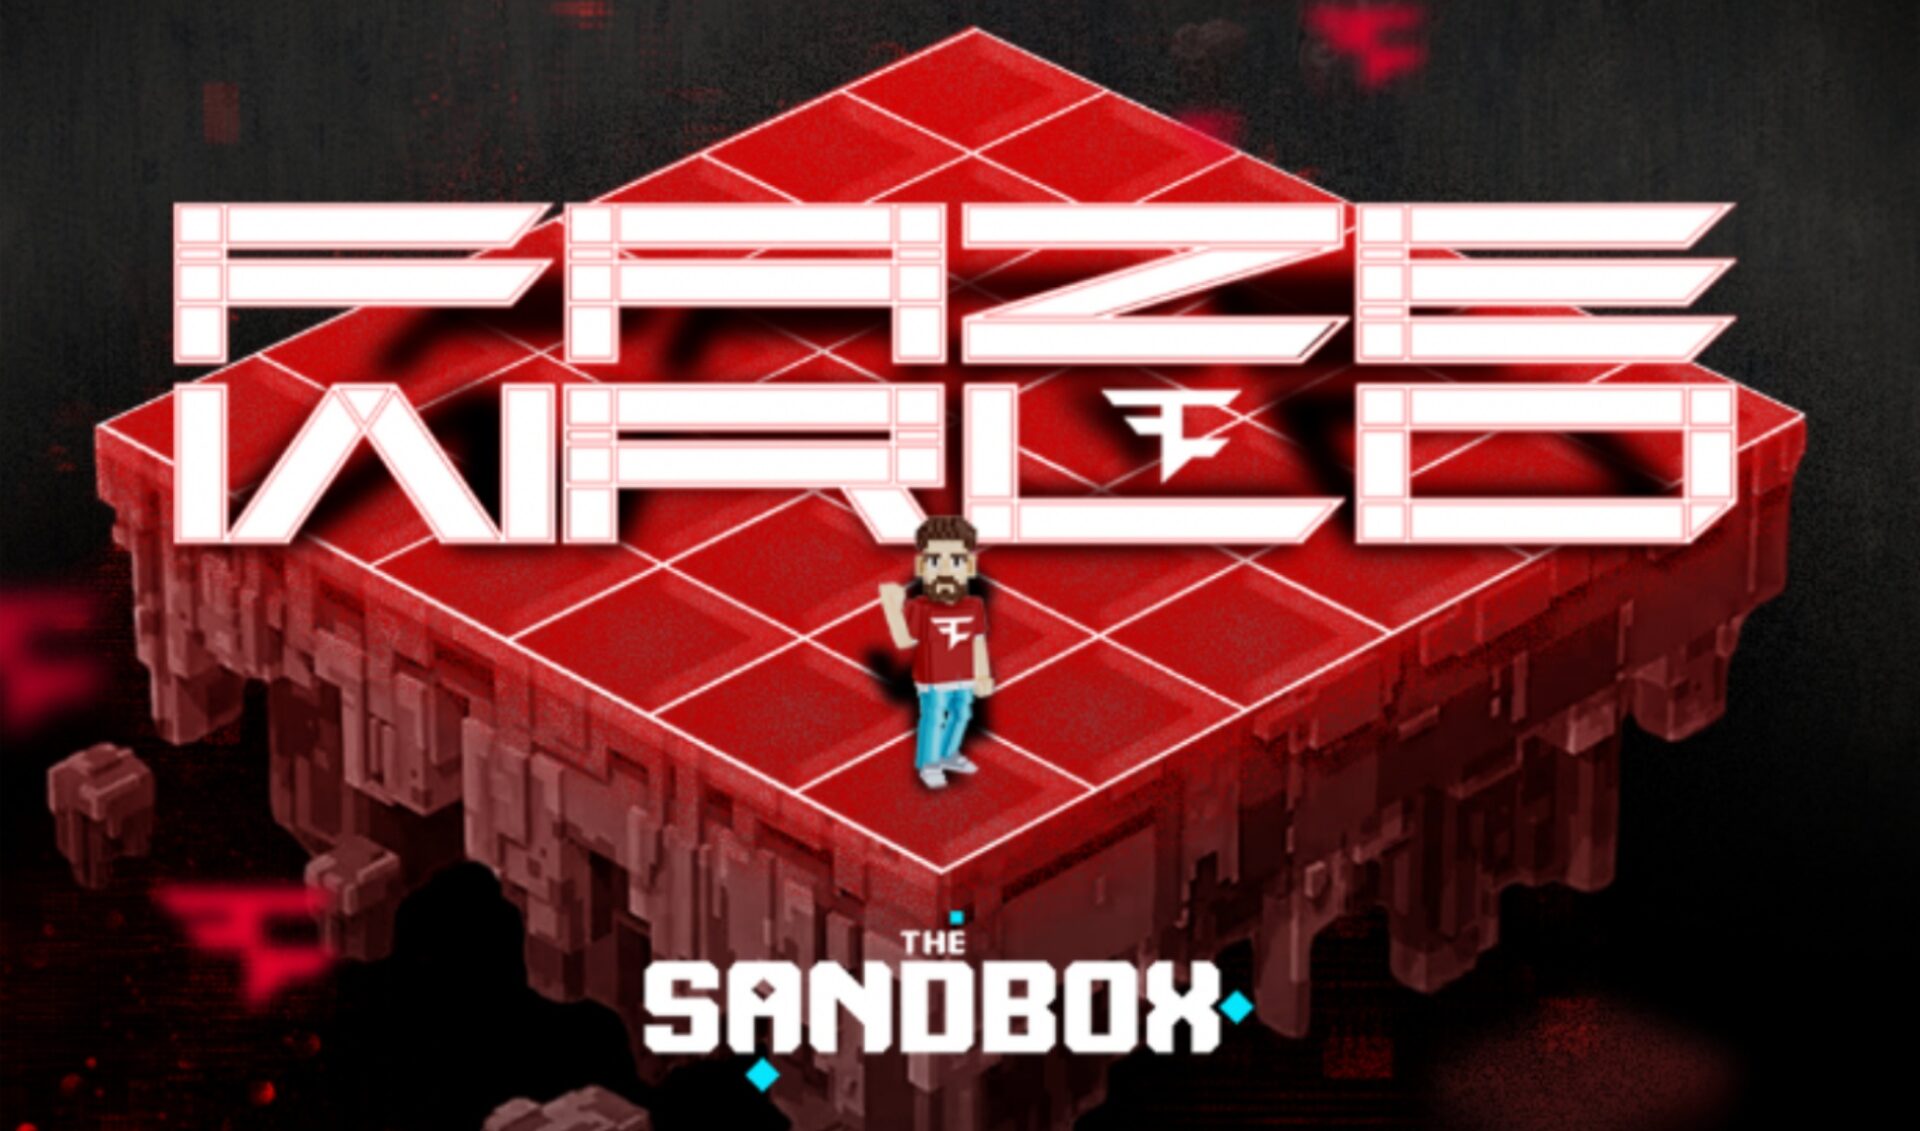 The company “at the apex of gaming and youth culture” is selling land in the metaverse. Welcome to FaZe World.